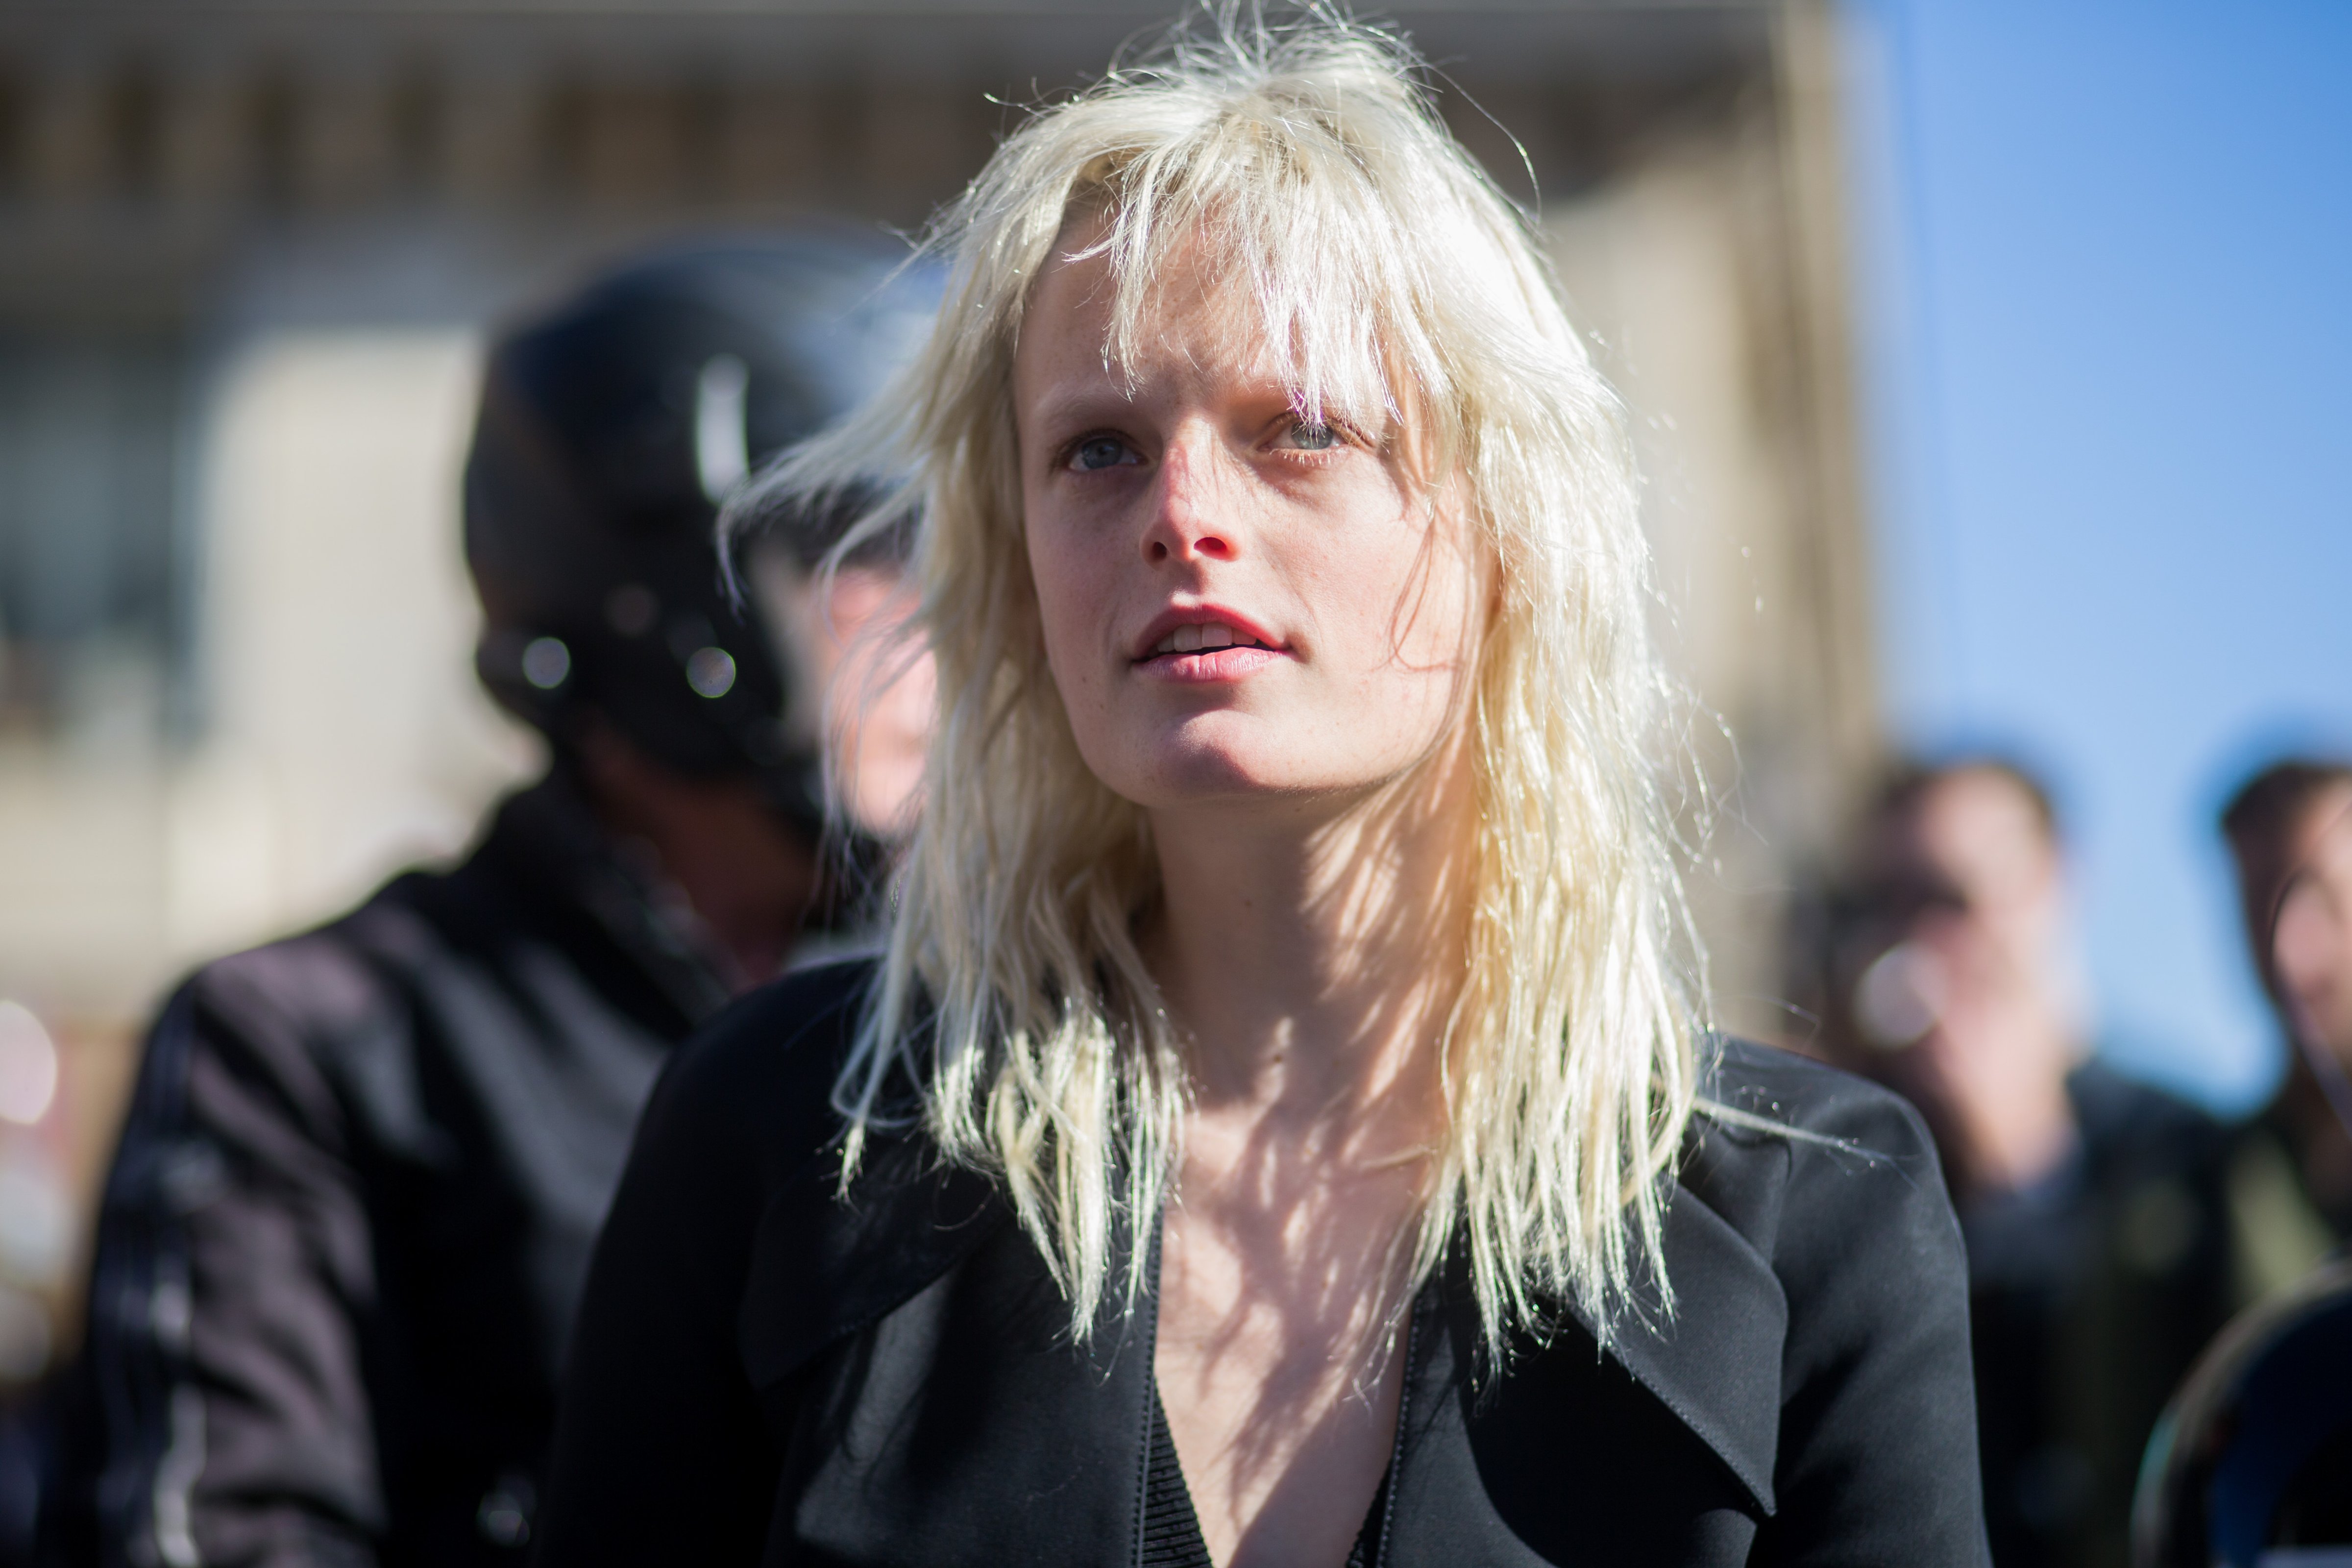 PARIS, FRANCE - OCTOBER 2: Hanne Gaby after Dior during the Paris Fashion Week Womenswear Spring/Summer 2016 on October 2, 2015 in Paris, France. (Christian Vierig—Getty Images)